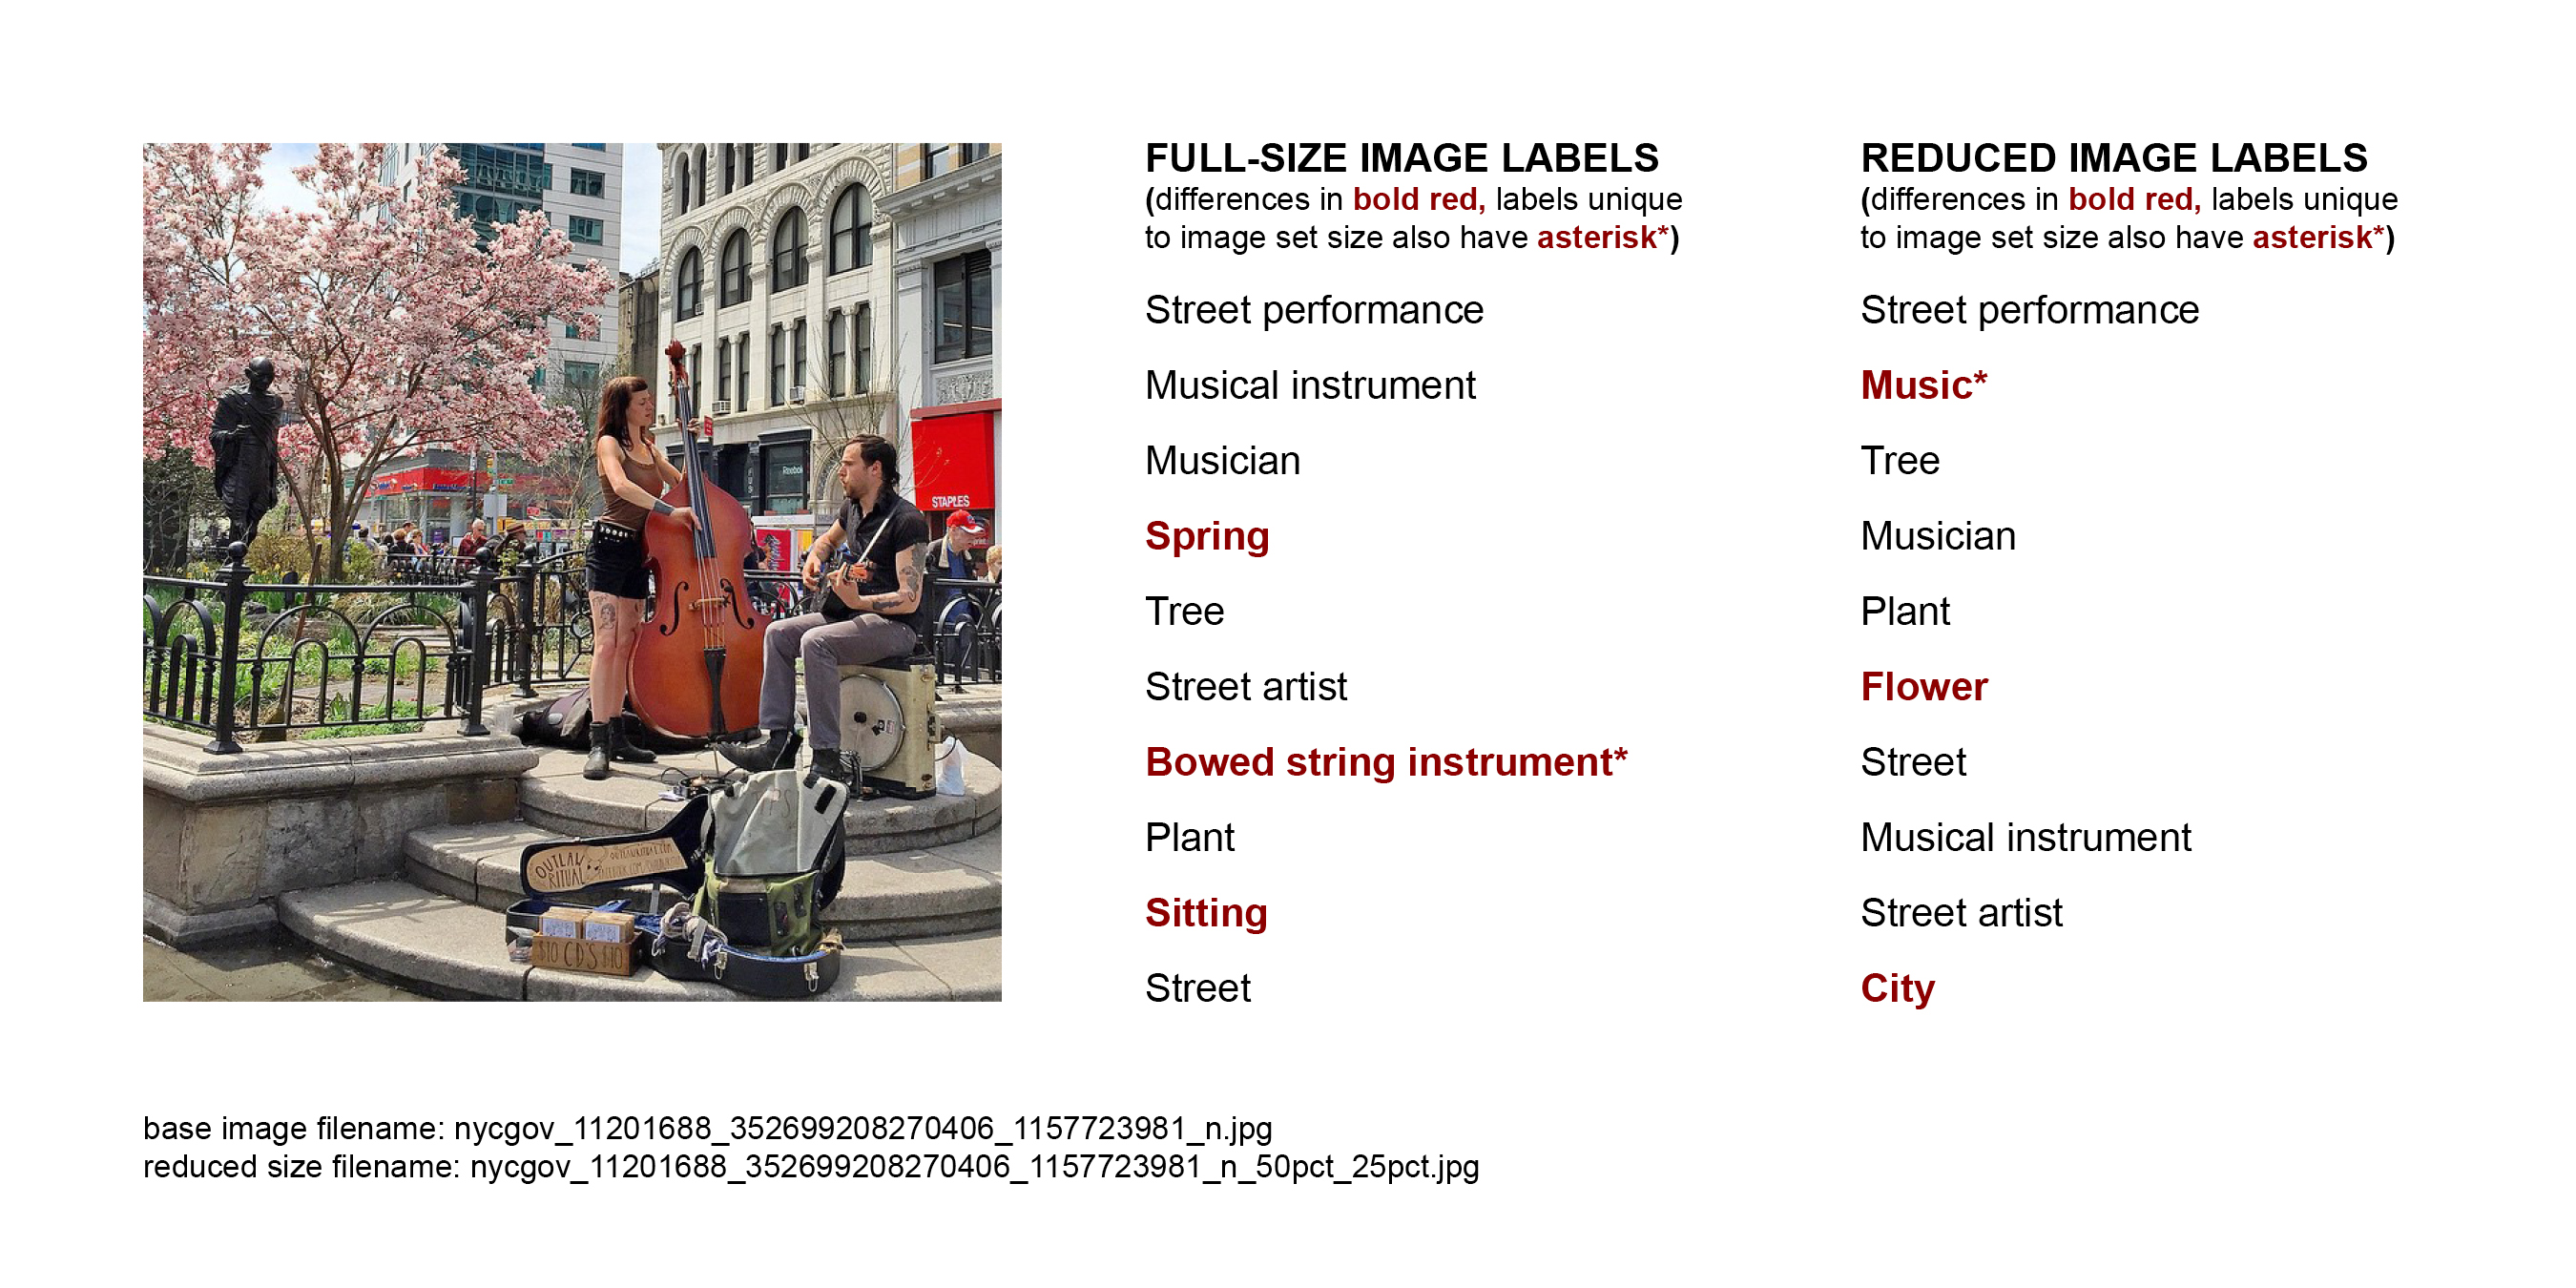 Instagram image of street performers alongside AI content labels